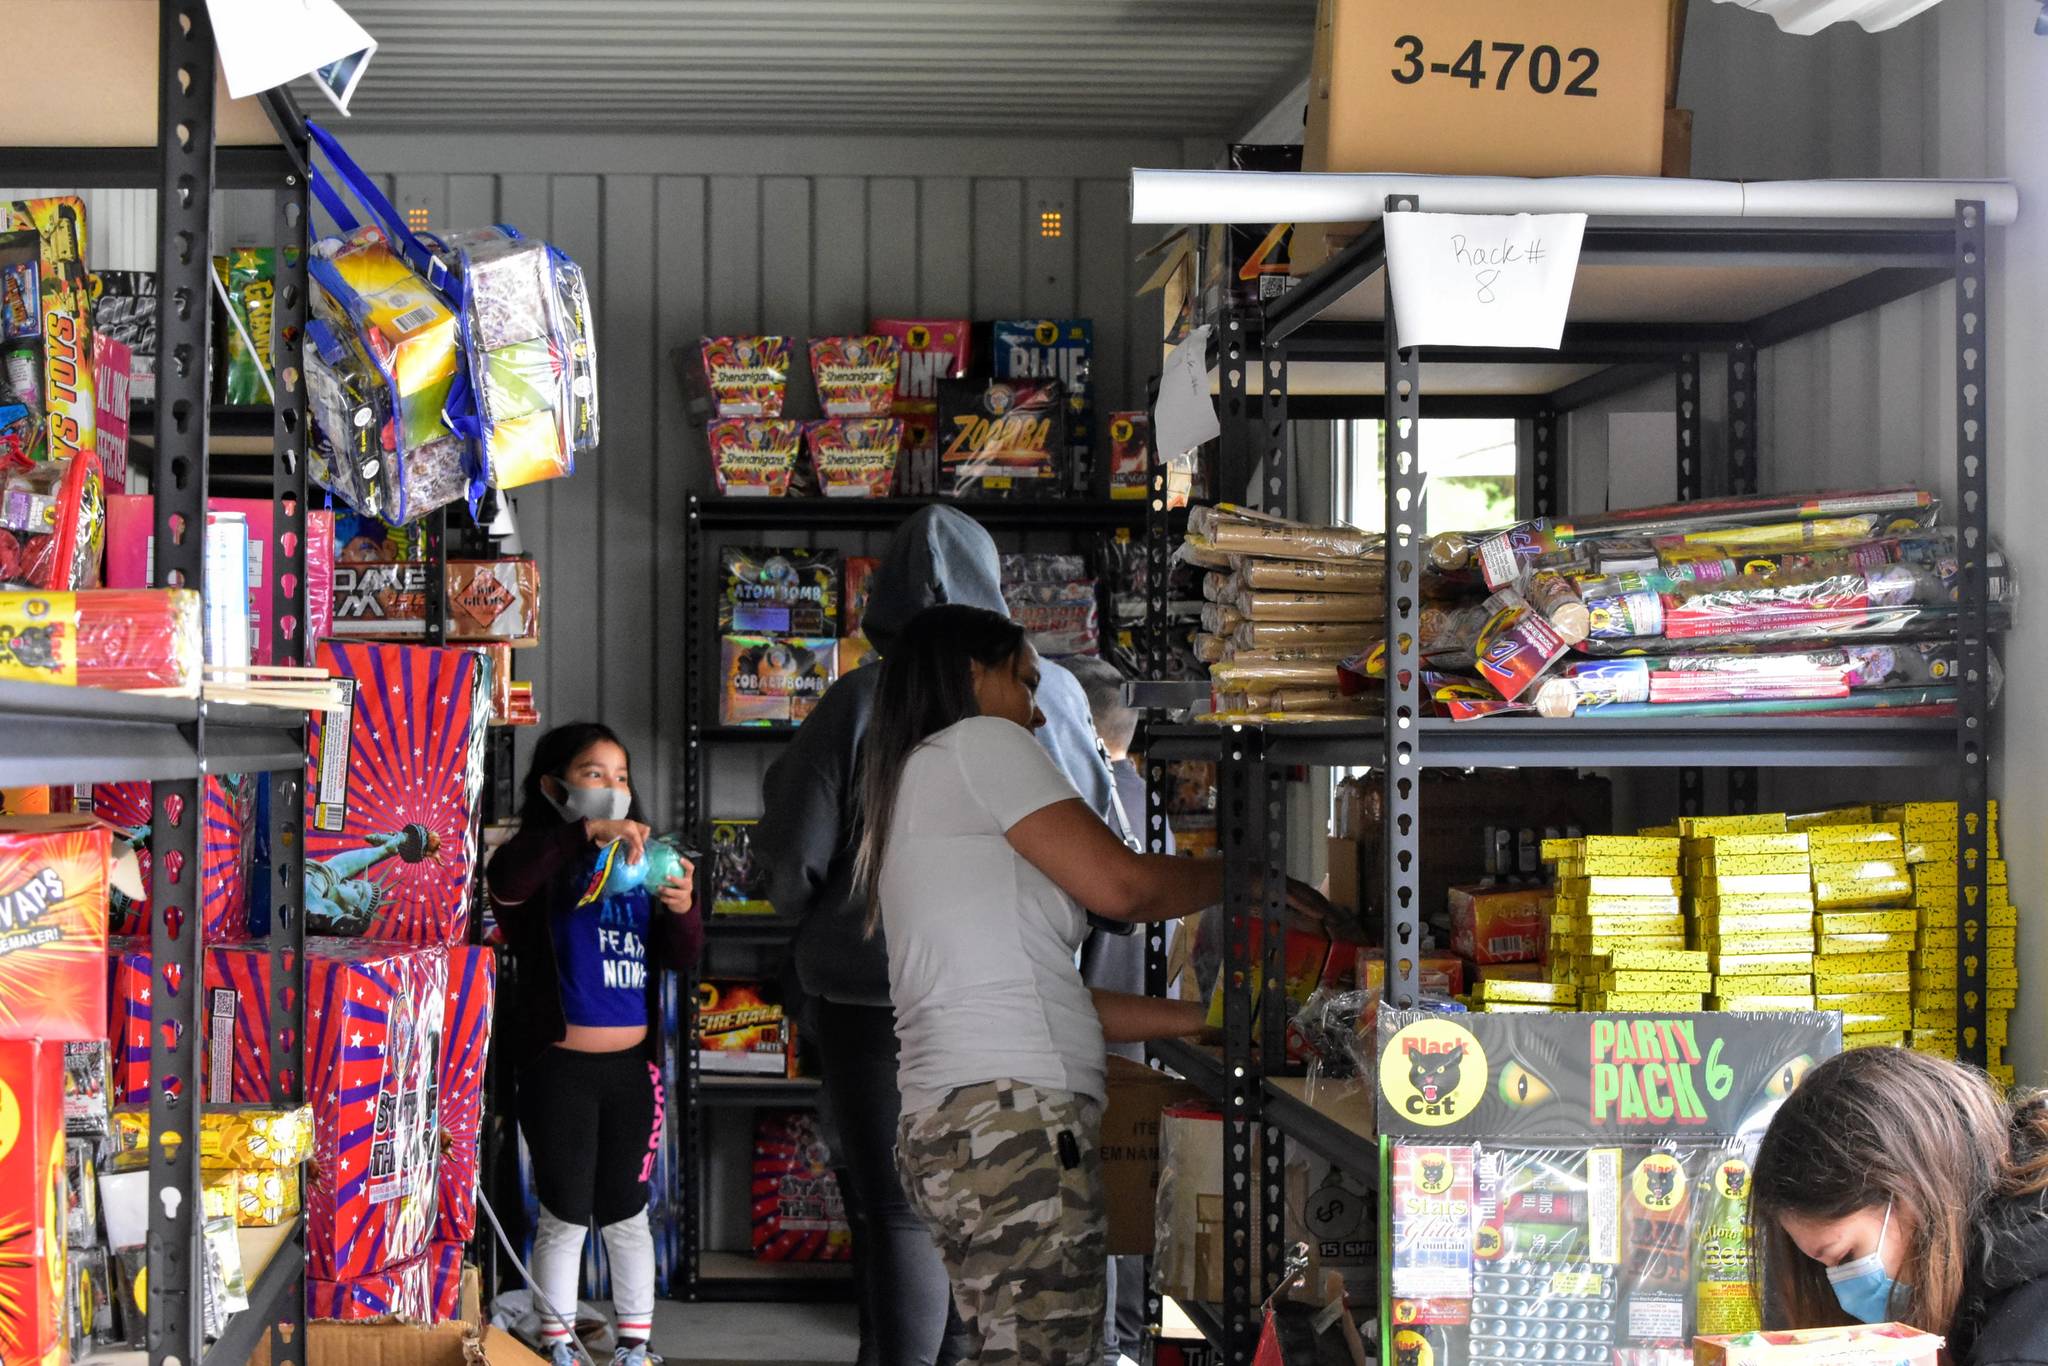 Fireworks being sold by Central Council Tlingit and Haida Indian Tribes of Alaska at their property on Fish Creek Road on Saturday, June 27, 2020. (Peter Segall | Juneau Empire)